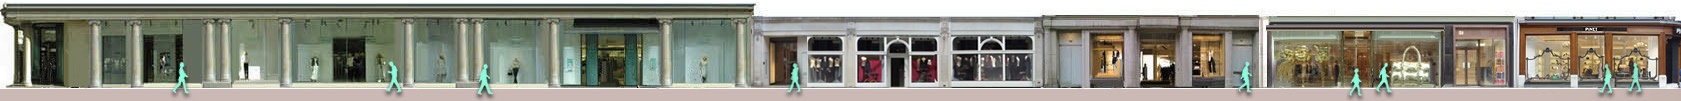 Fenwick department store on New Bond Street, Mulberry bags, Armani clothing, Dolce and Gabbana